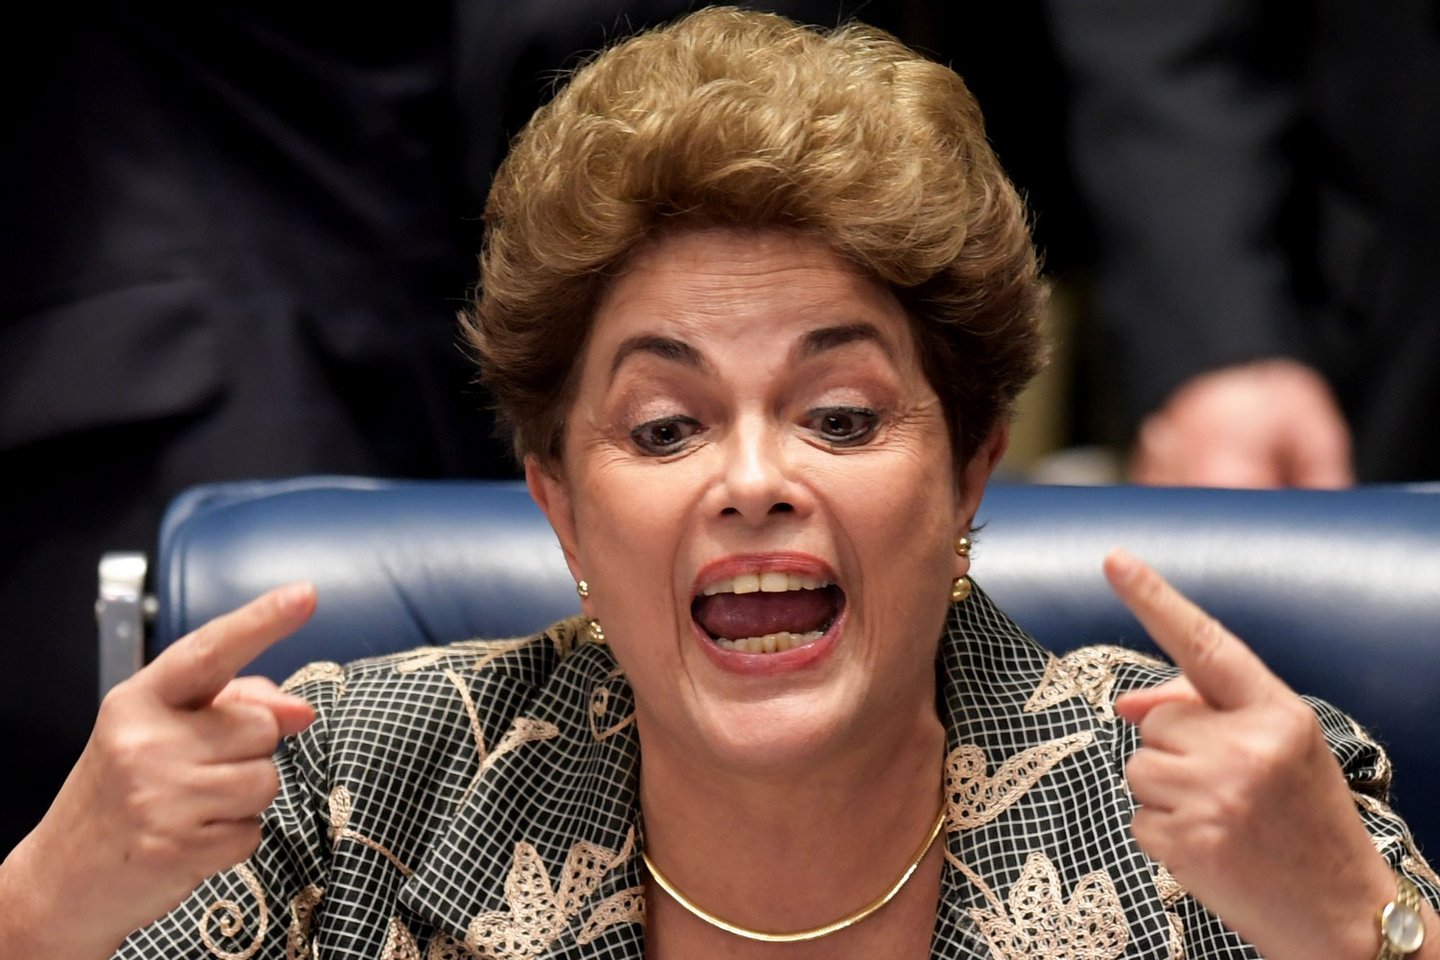 Suspended Brazilian President Dilma Rousseff gestures during her testimony in her impeachment trial at the National Congress in Brasilia on August 29, 2016. Rousseff told senators in emotional, combative testimony at her trial Monday that voting for her impeachment would amount to a "coup d'etat." / AFP / EVARISTO SA (Photo credit should read EVARISTO SA/AFP/Getty Images)